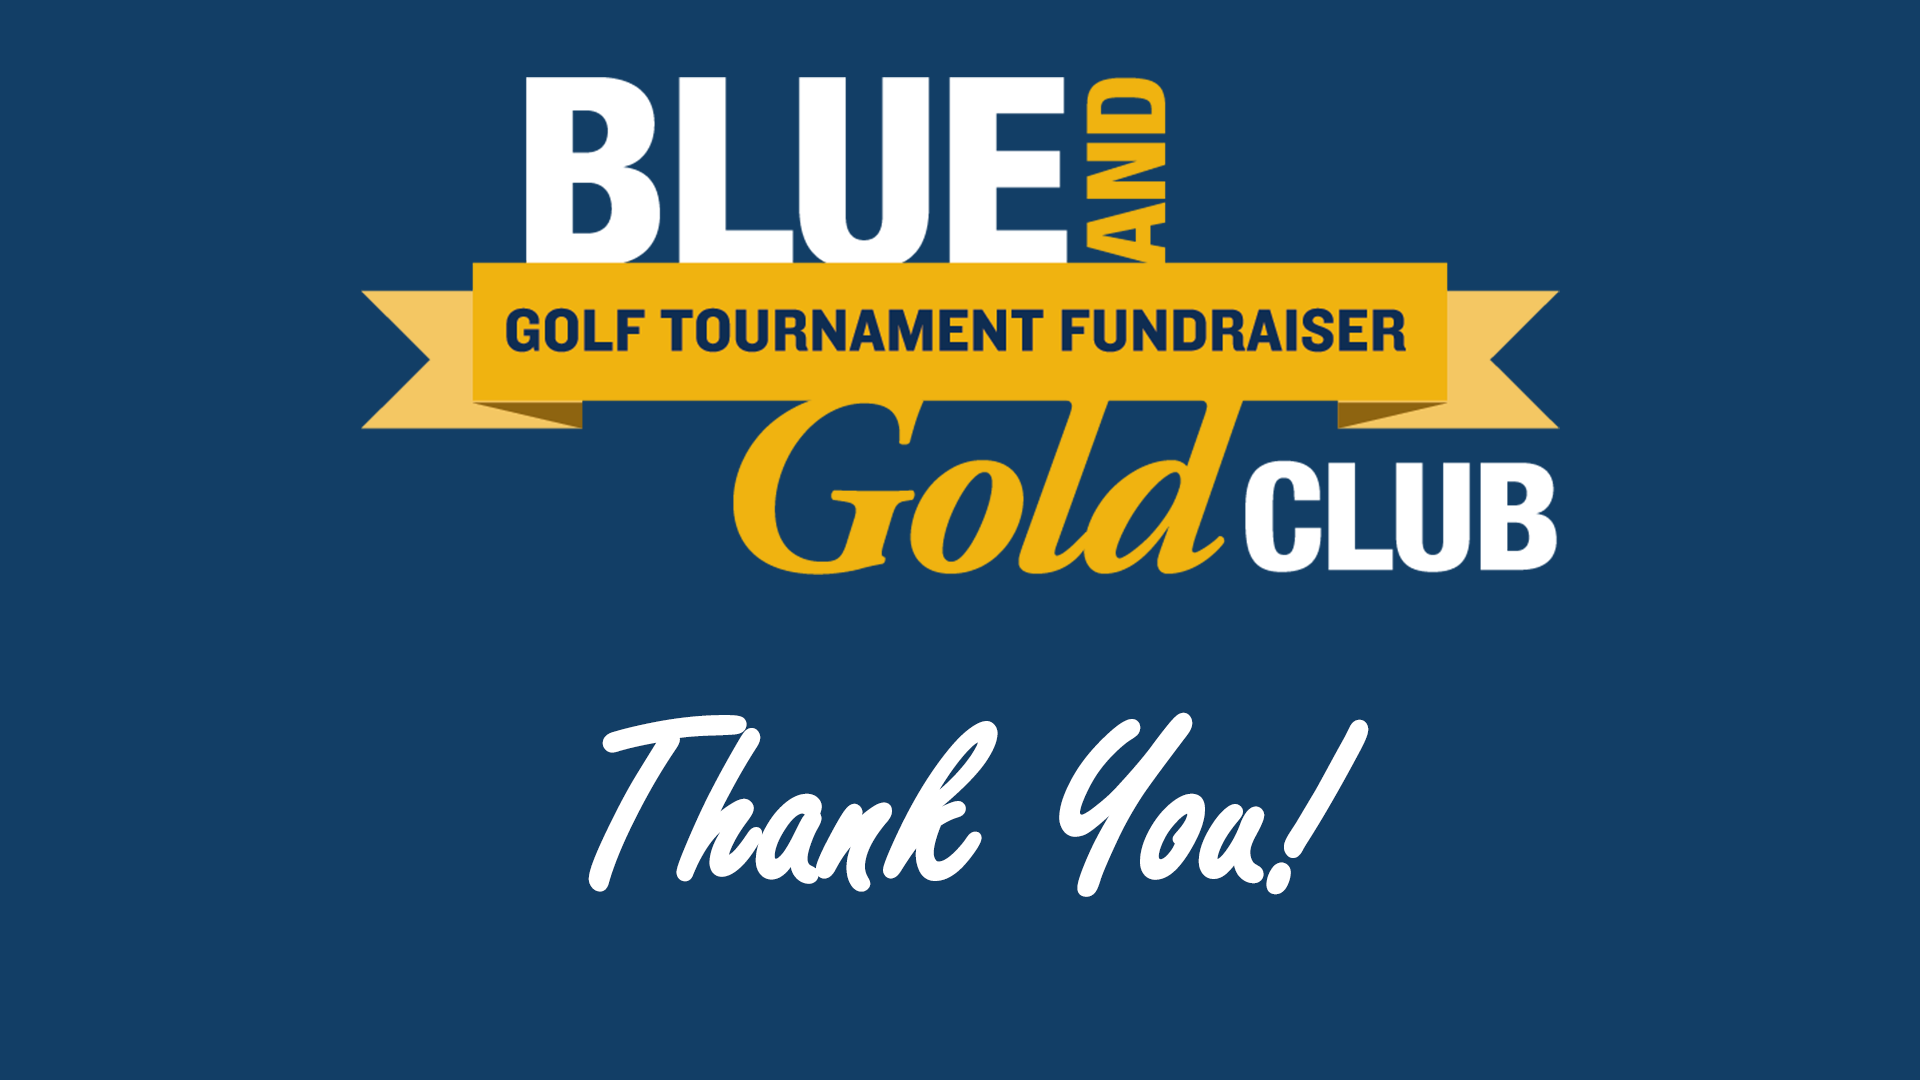 Blue & Gold Golf Tournament Logo and the words thank you!